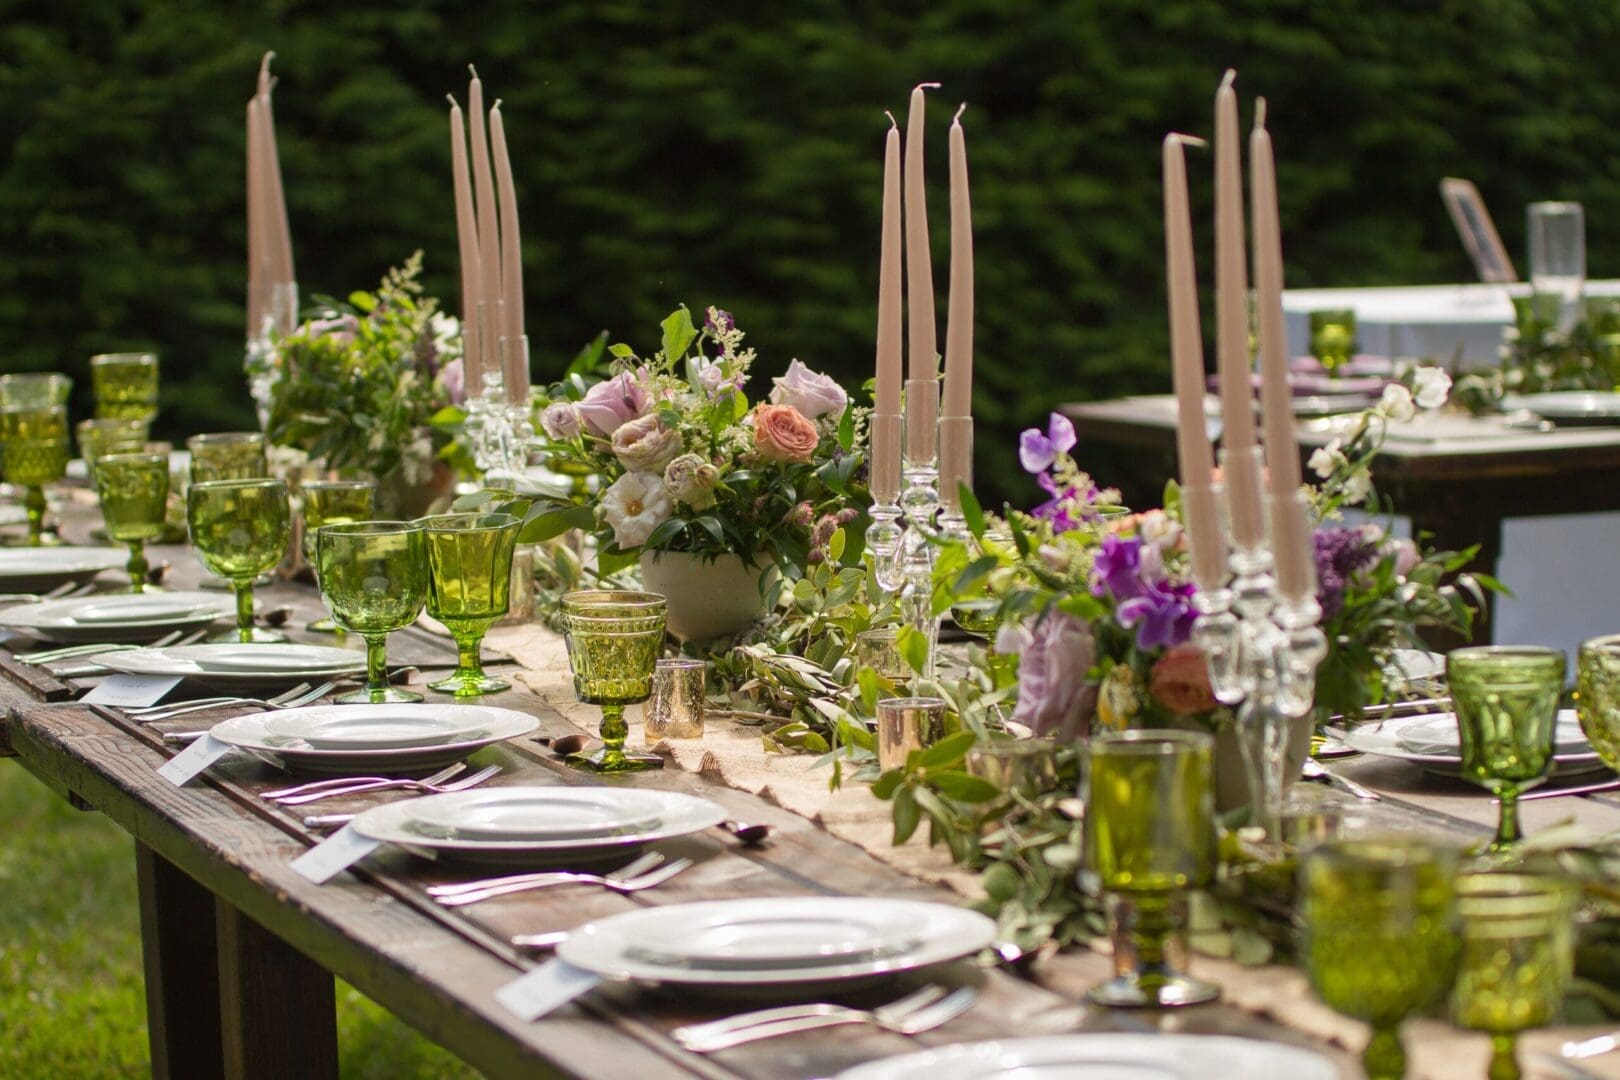 A stunning wedding tablescape adorned with green glasses and candles.